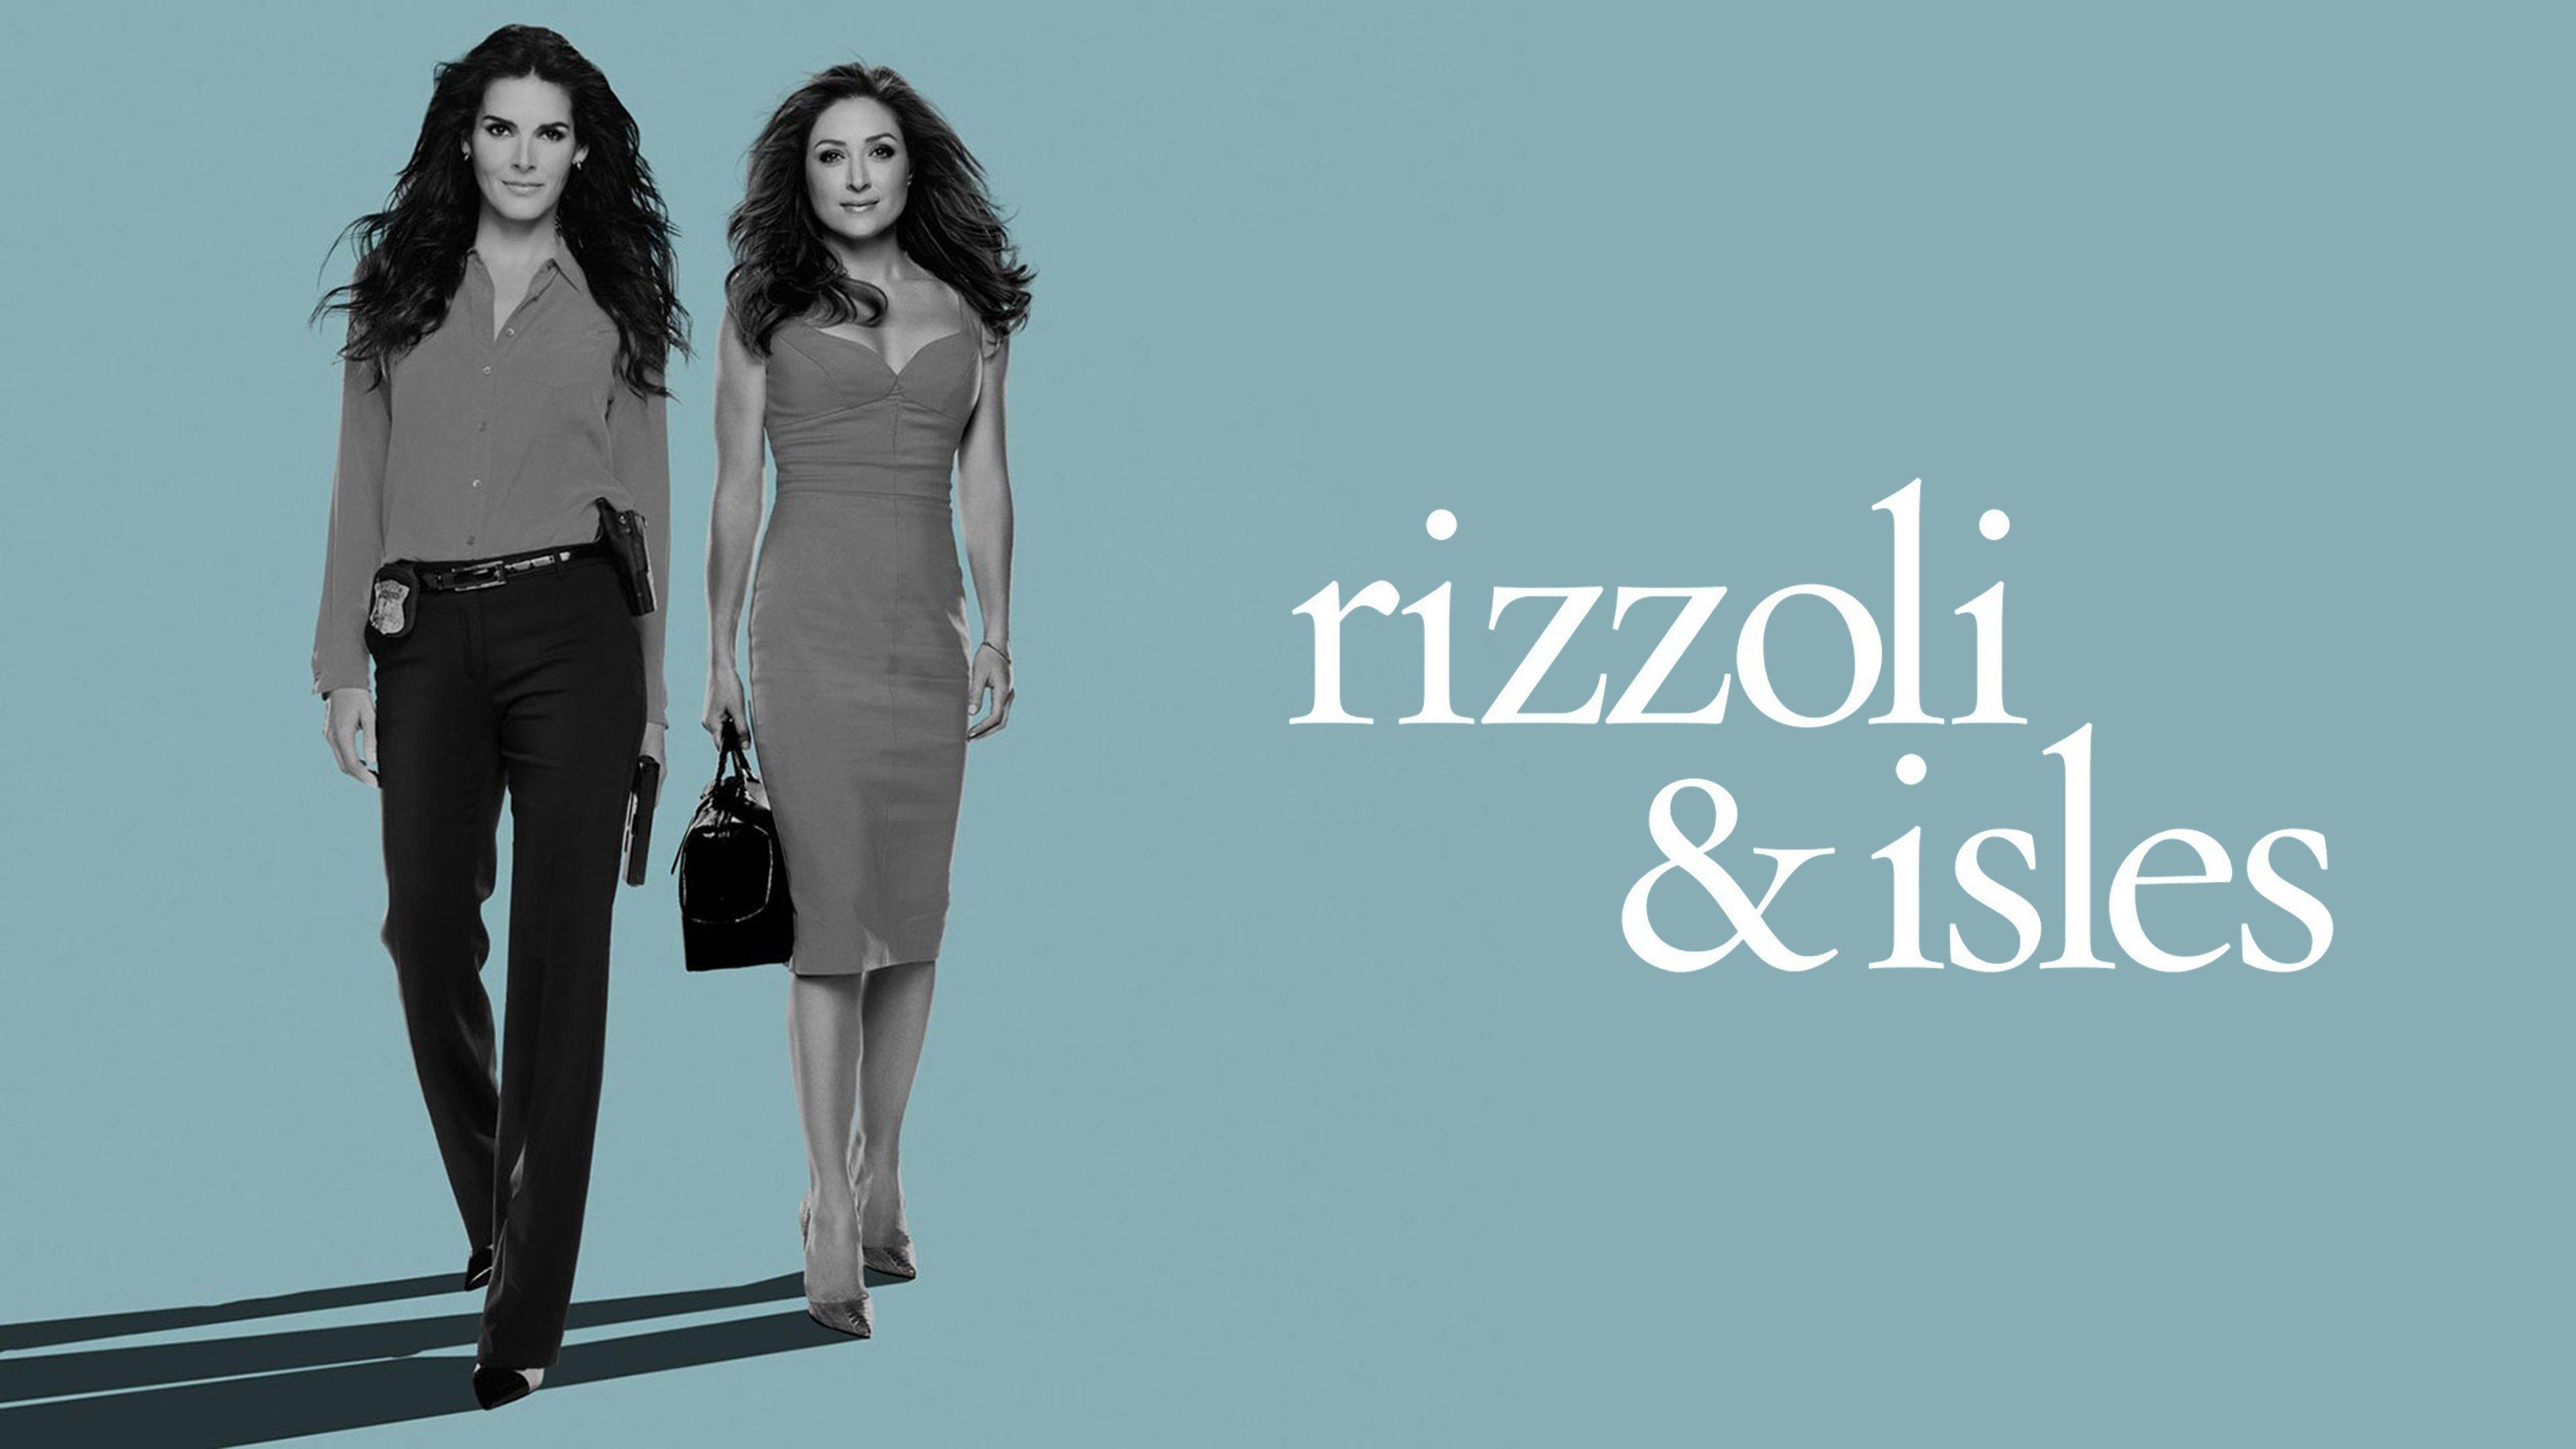 watch rizzoli and isles shadow of doubt